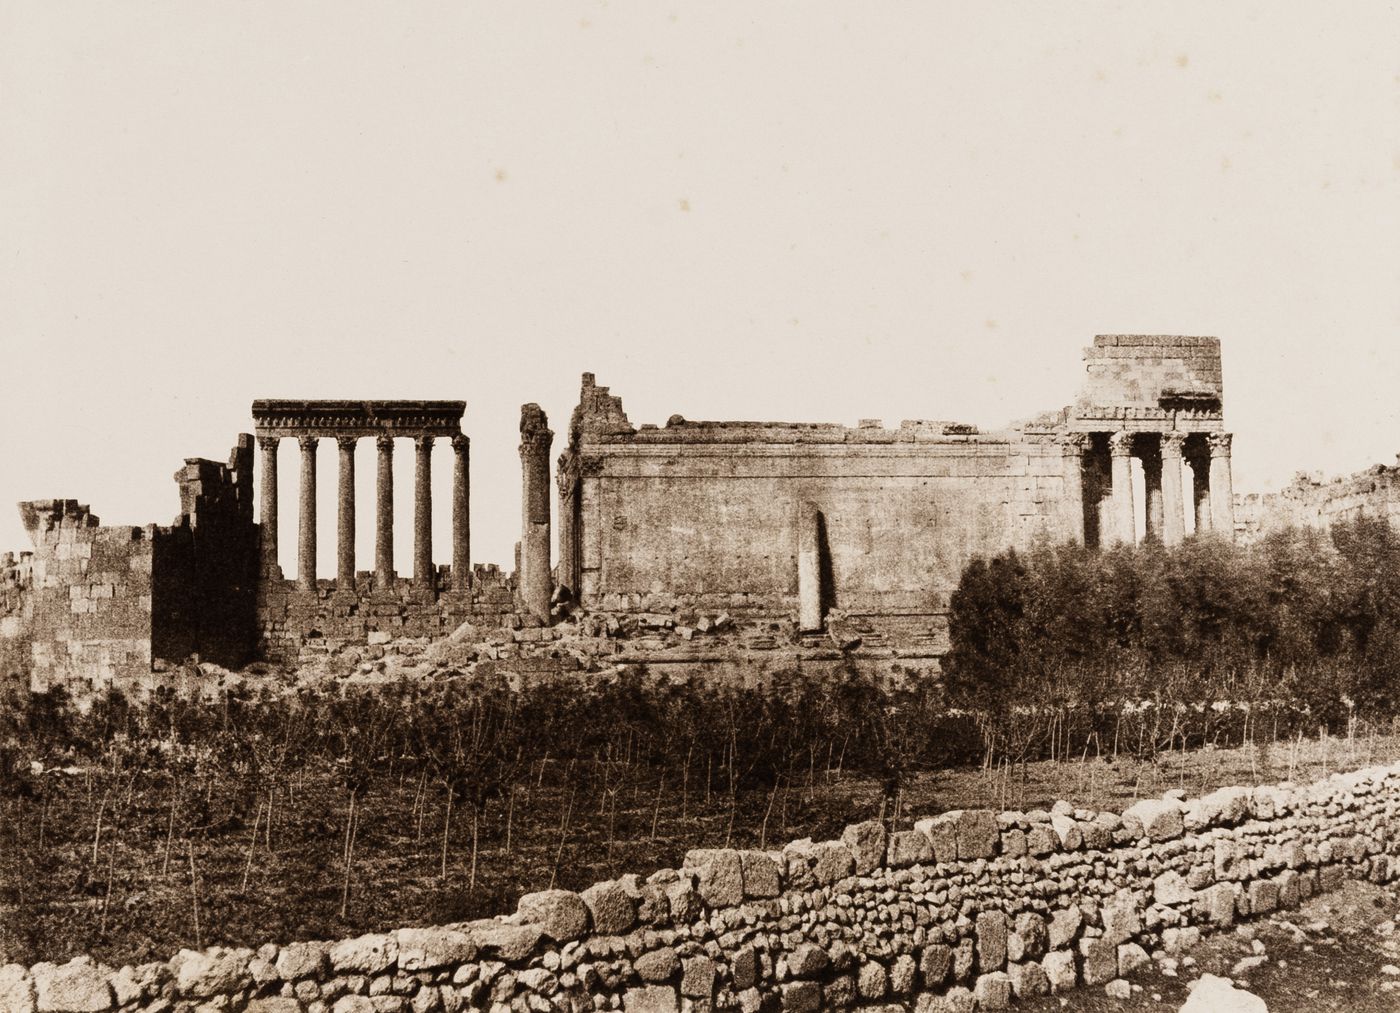 Distant view of the ruins of the Temple to Jupiter and the Temple of the Sun, Baalbek, Ottoman Empire (now in Lebanon)